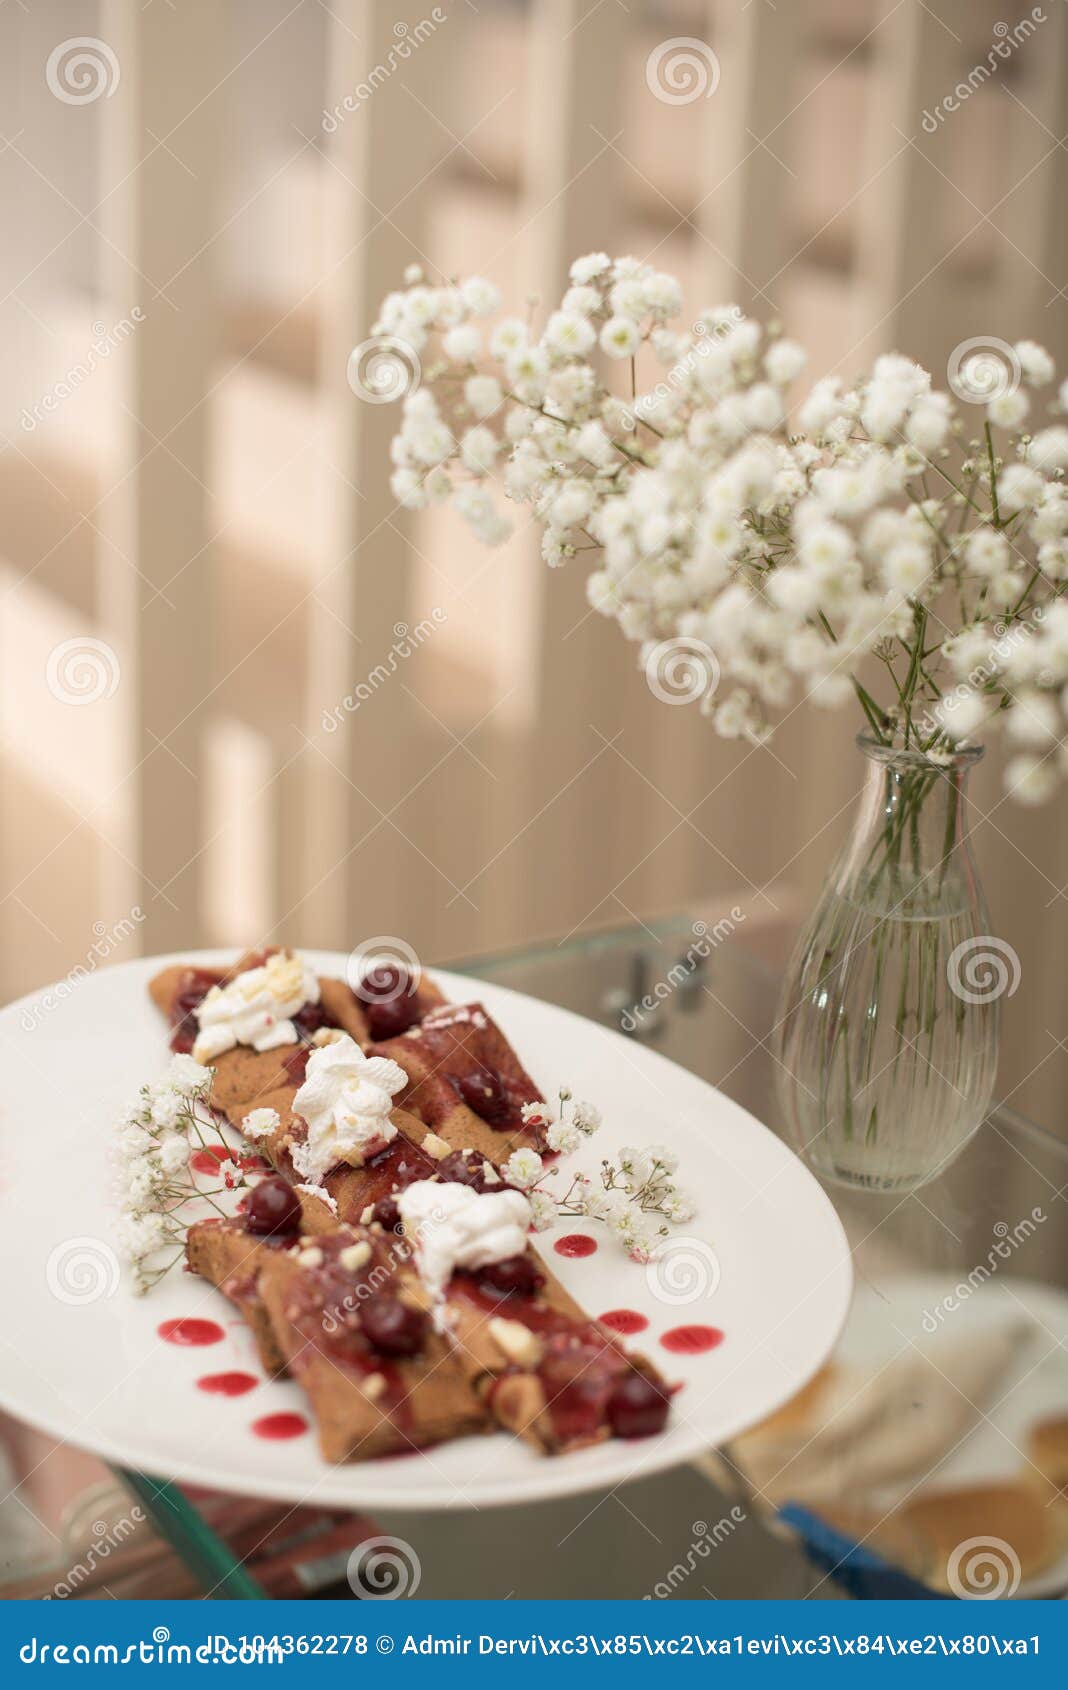 pancakes on plate with decorations and flowers in vase